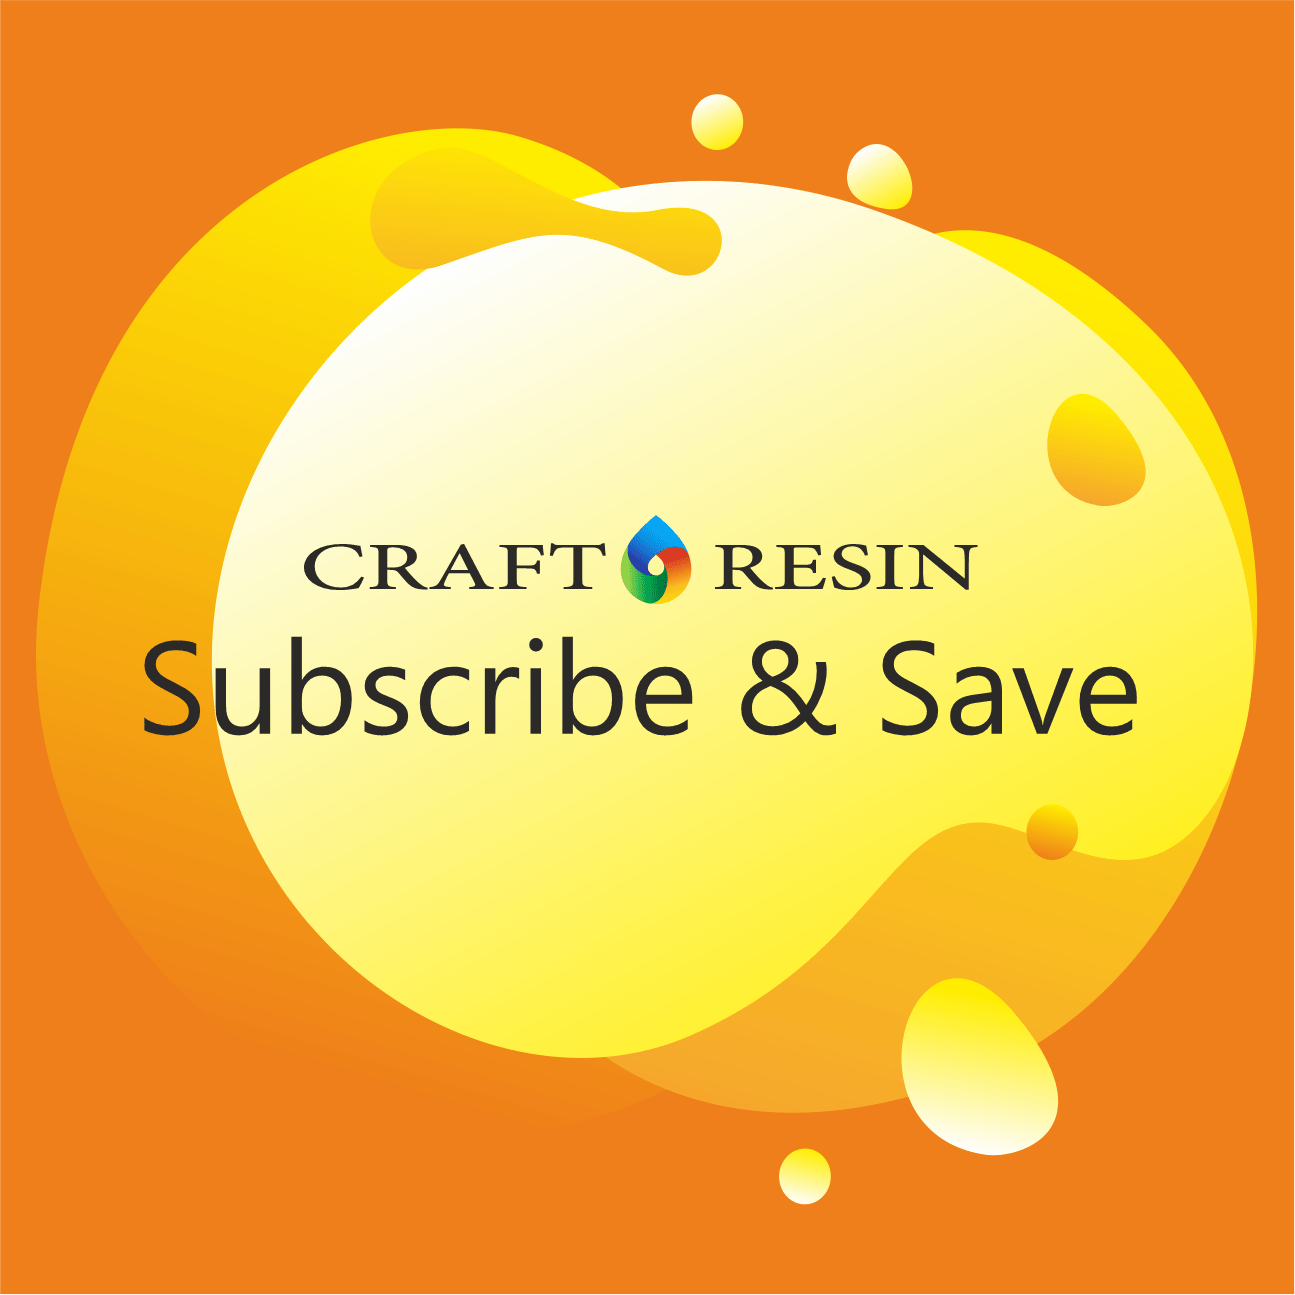 What Is The Subscribe And Save Option That Craft Resin Offers? - Craft Resin